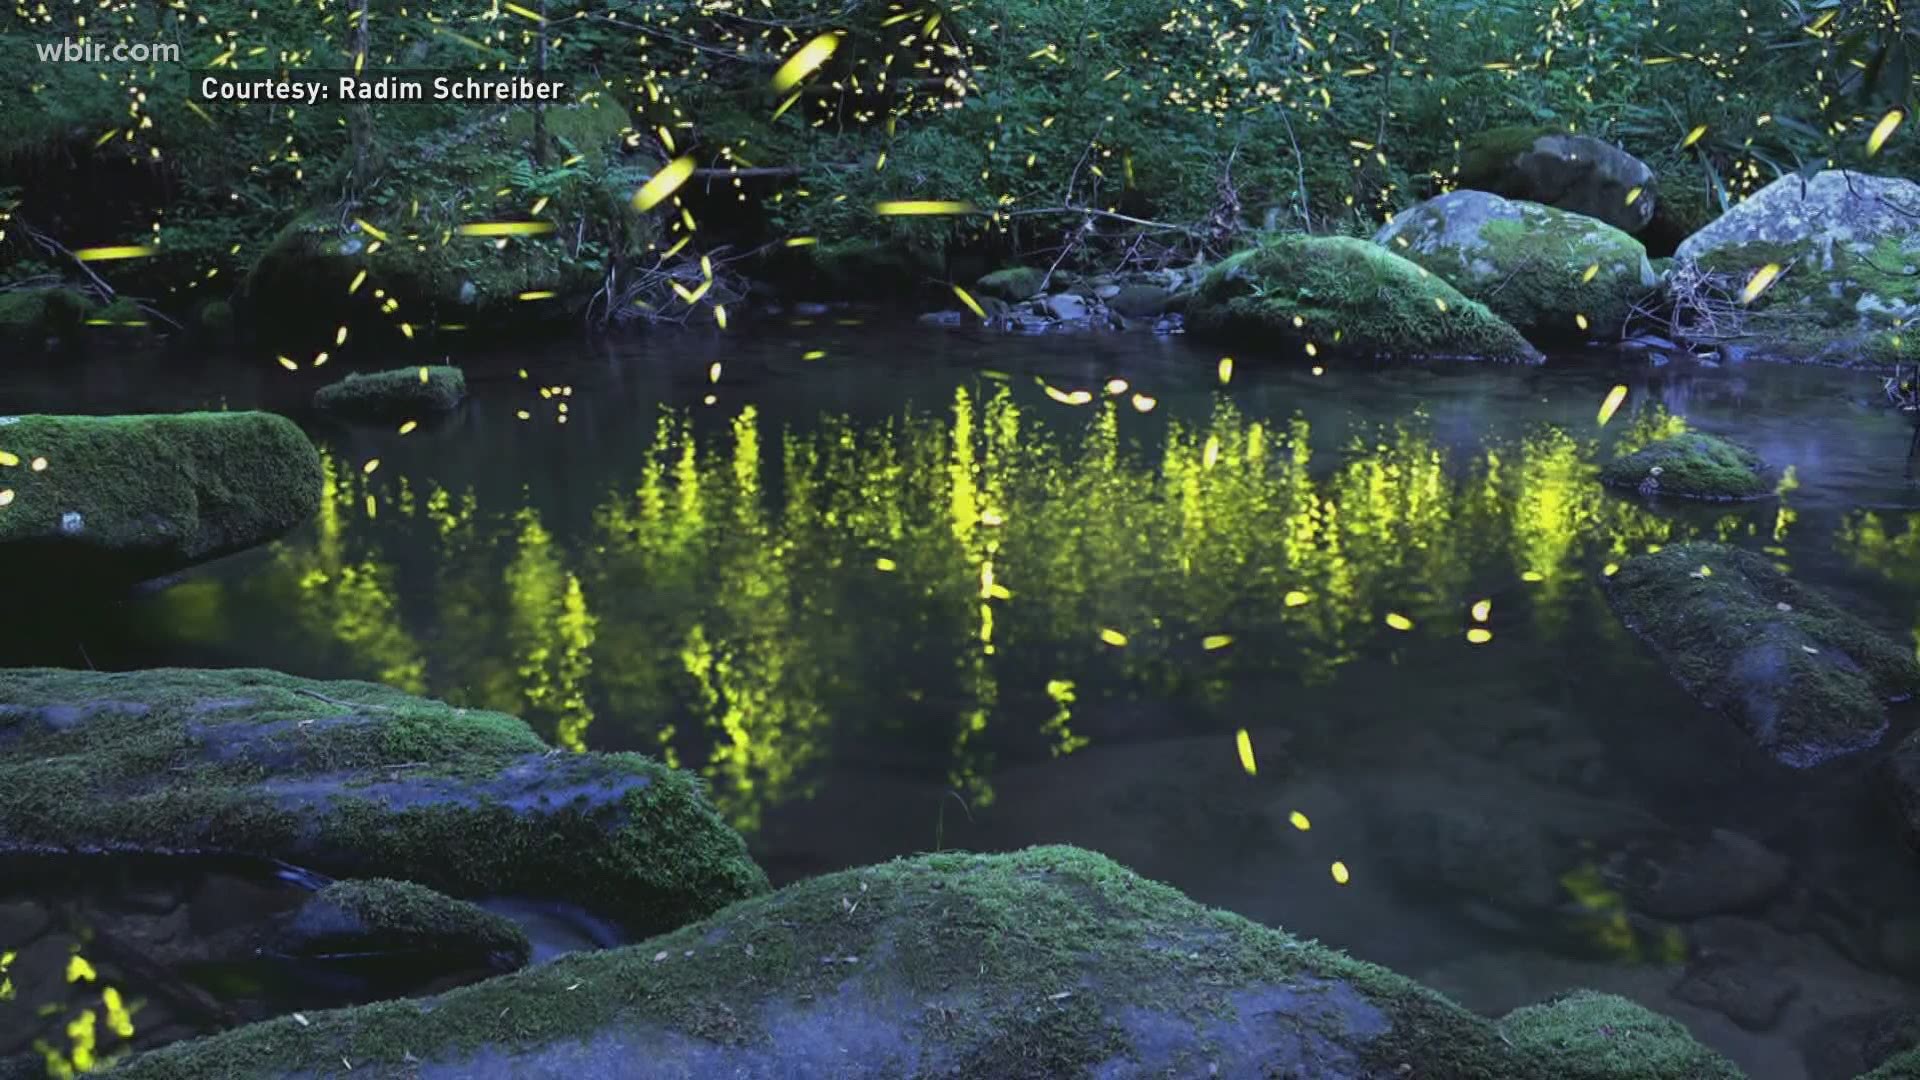 The synchronous fireflies at Elkmont draw in thousands of people from across the country each year around late May and early June hoping to catch the rare event.